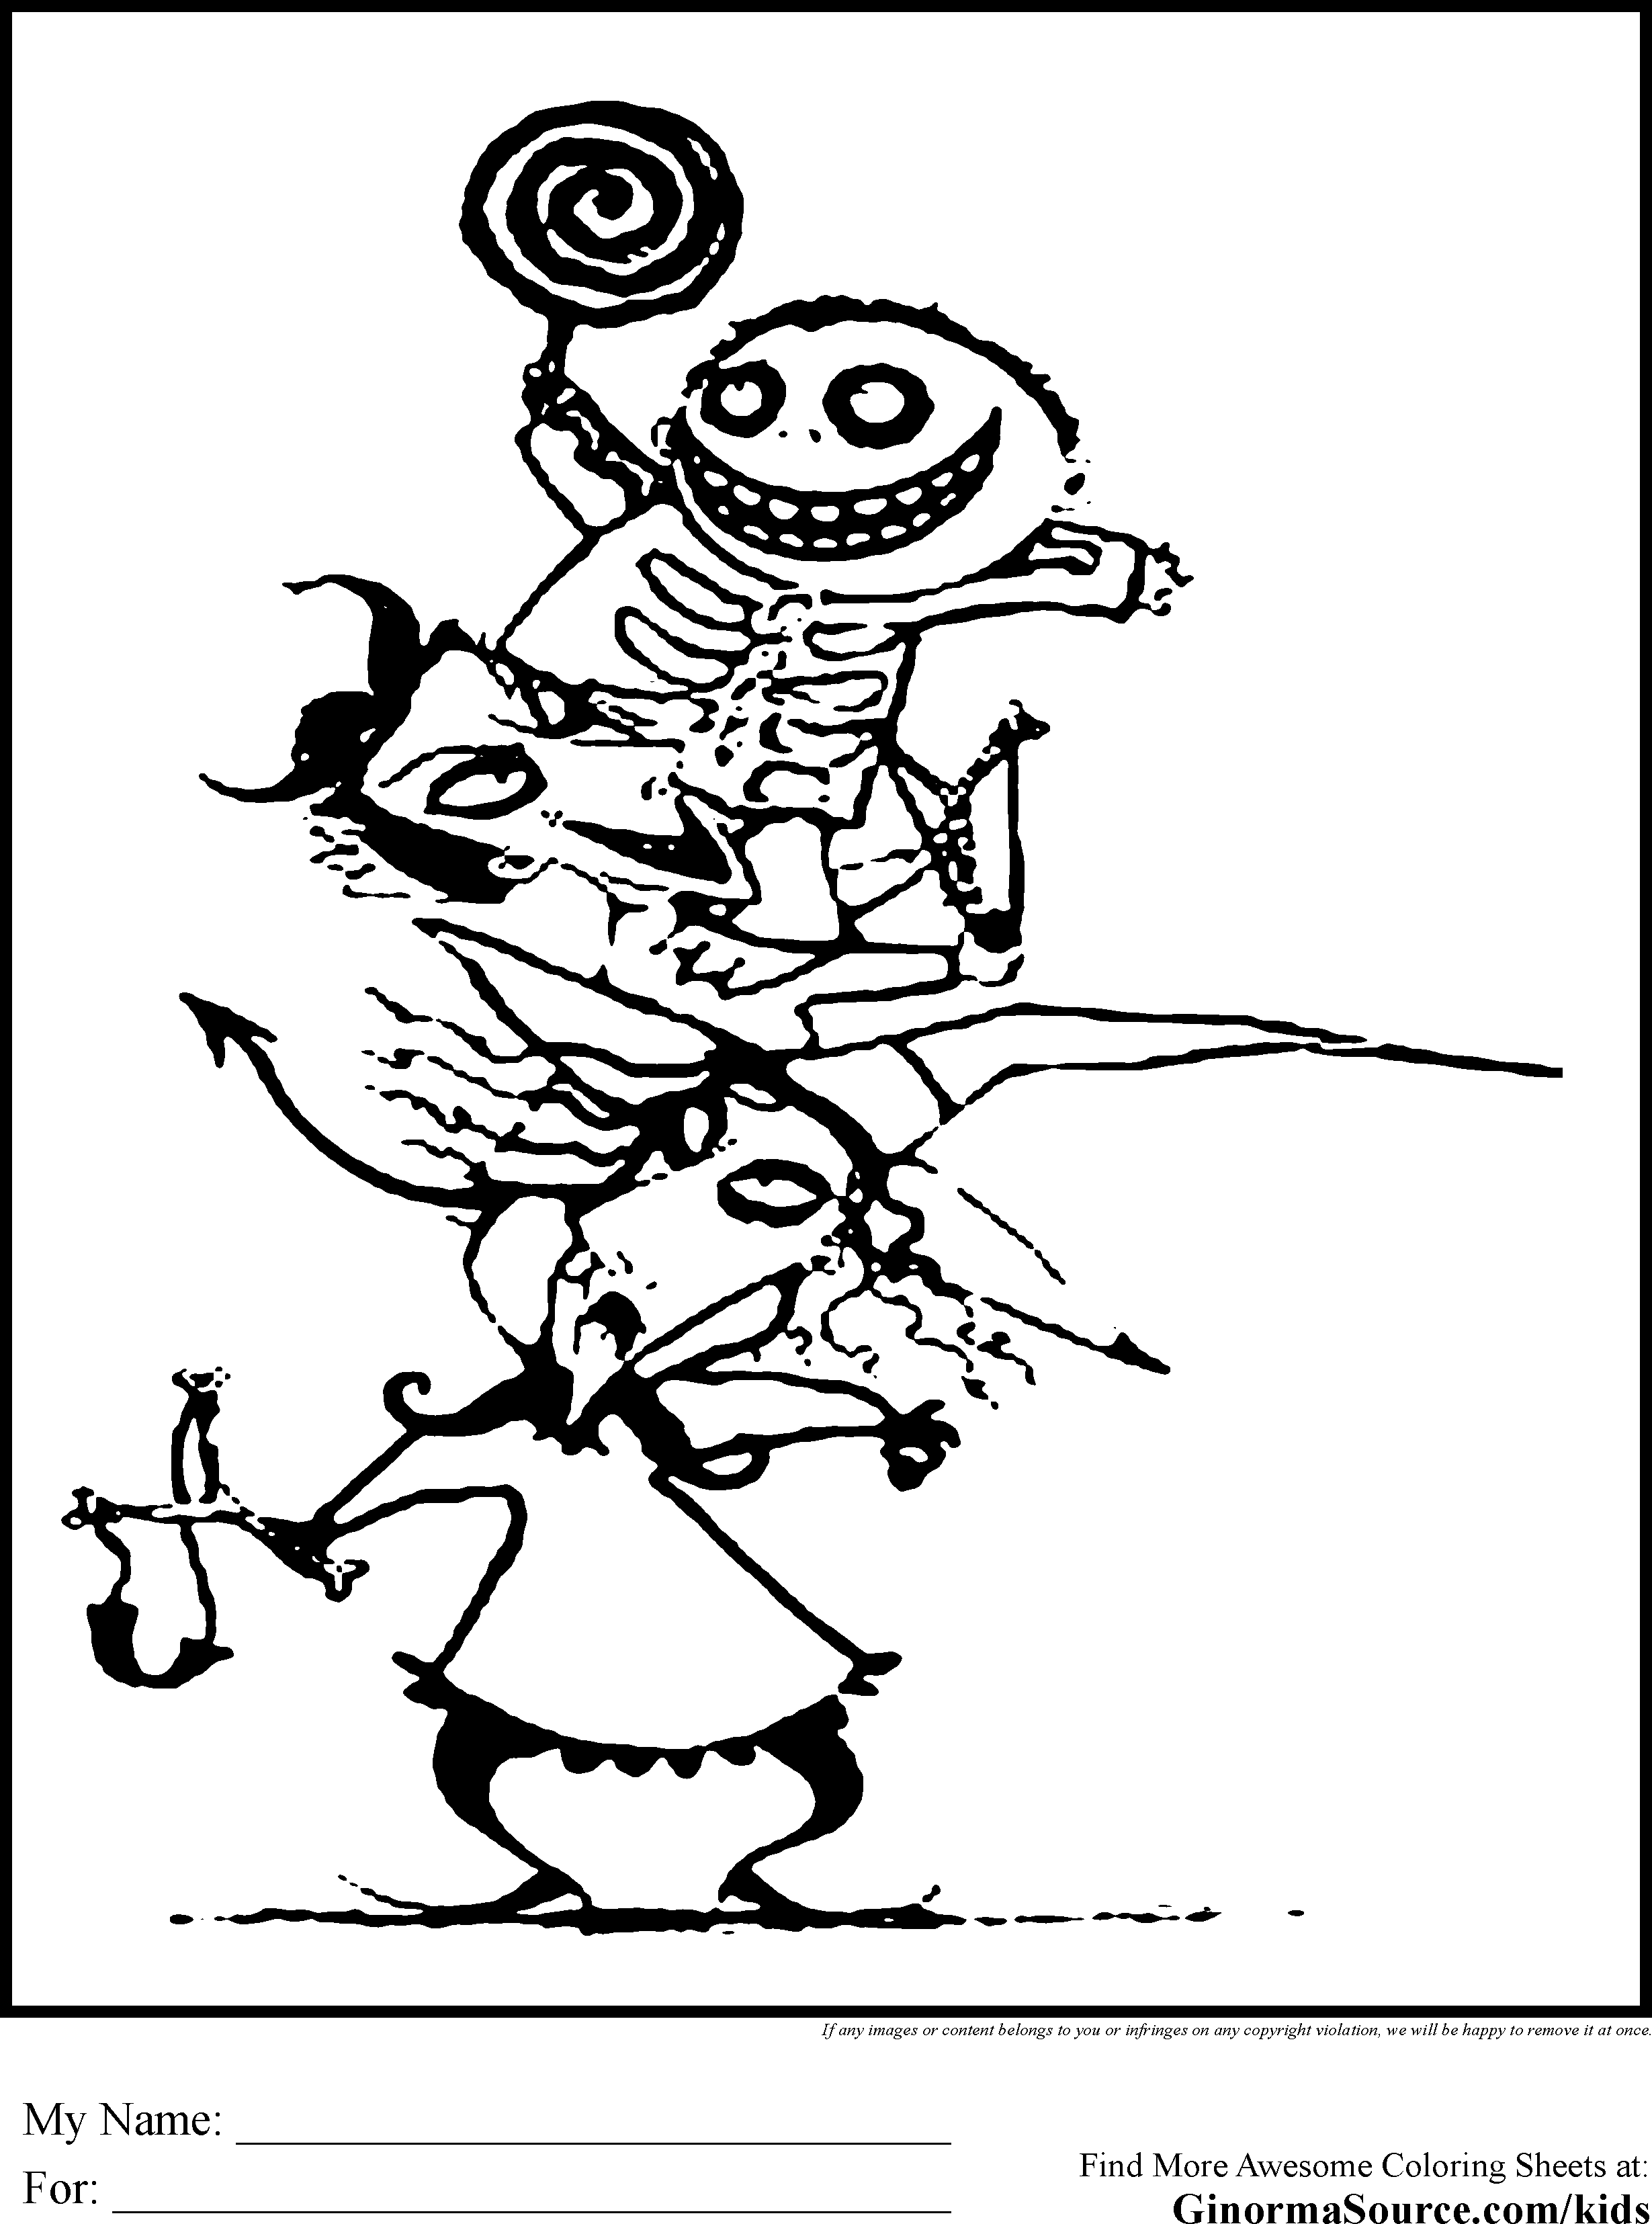 Nightmare-Before-Christmas-Coloring-Pages.gif (2459Ã3310) | tim ...